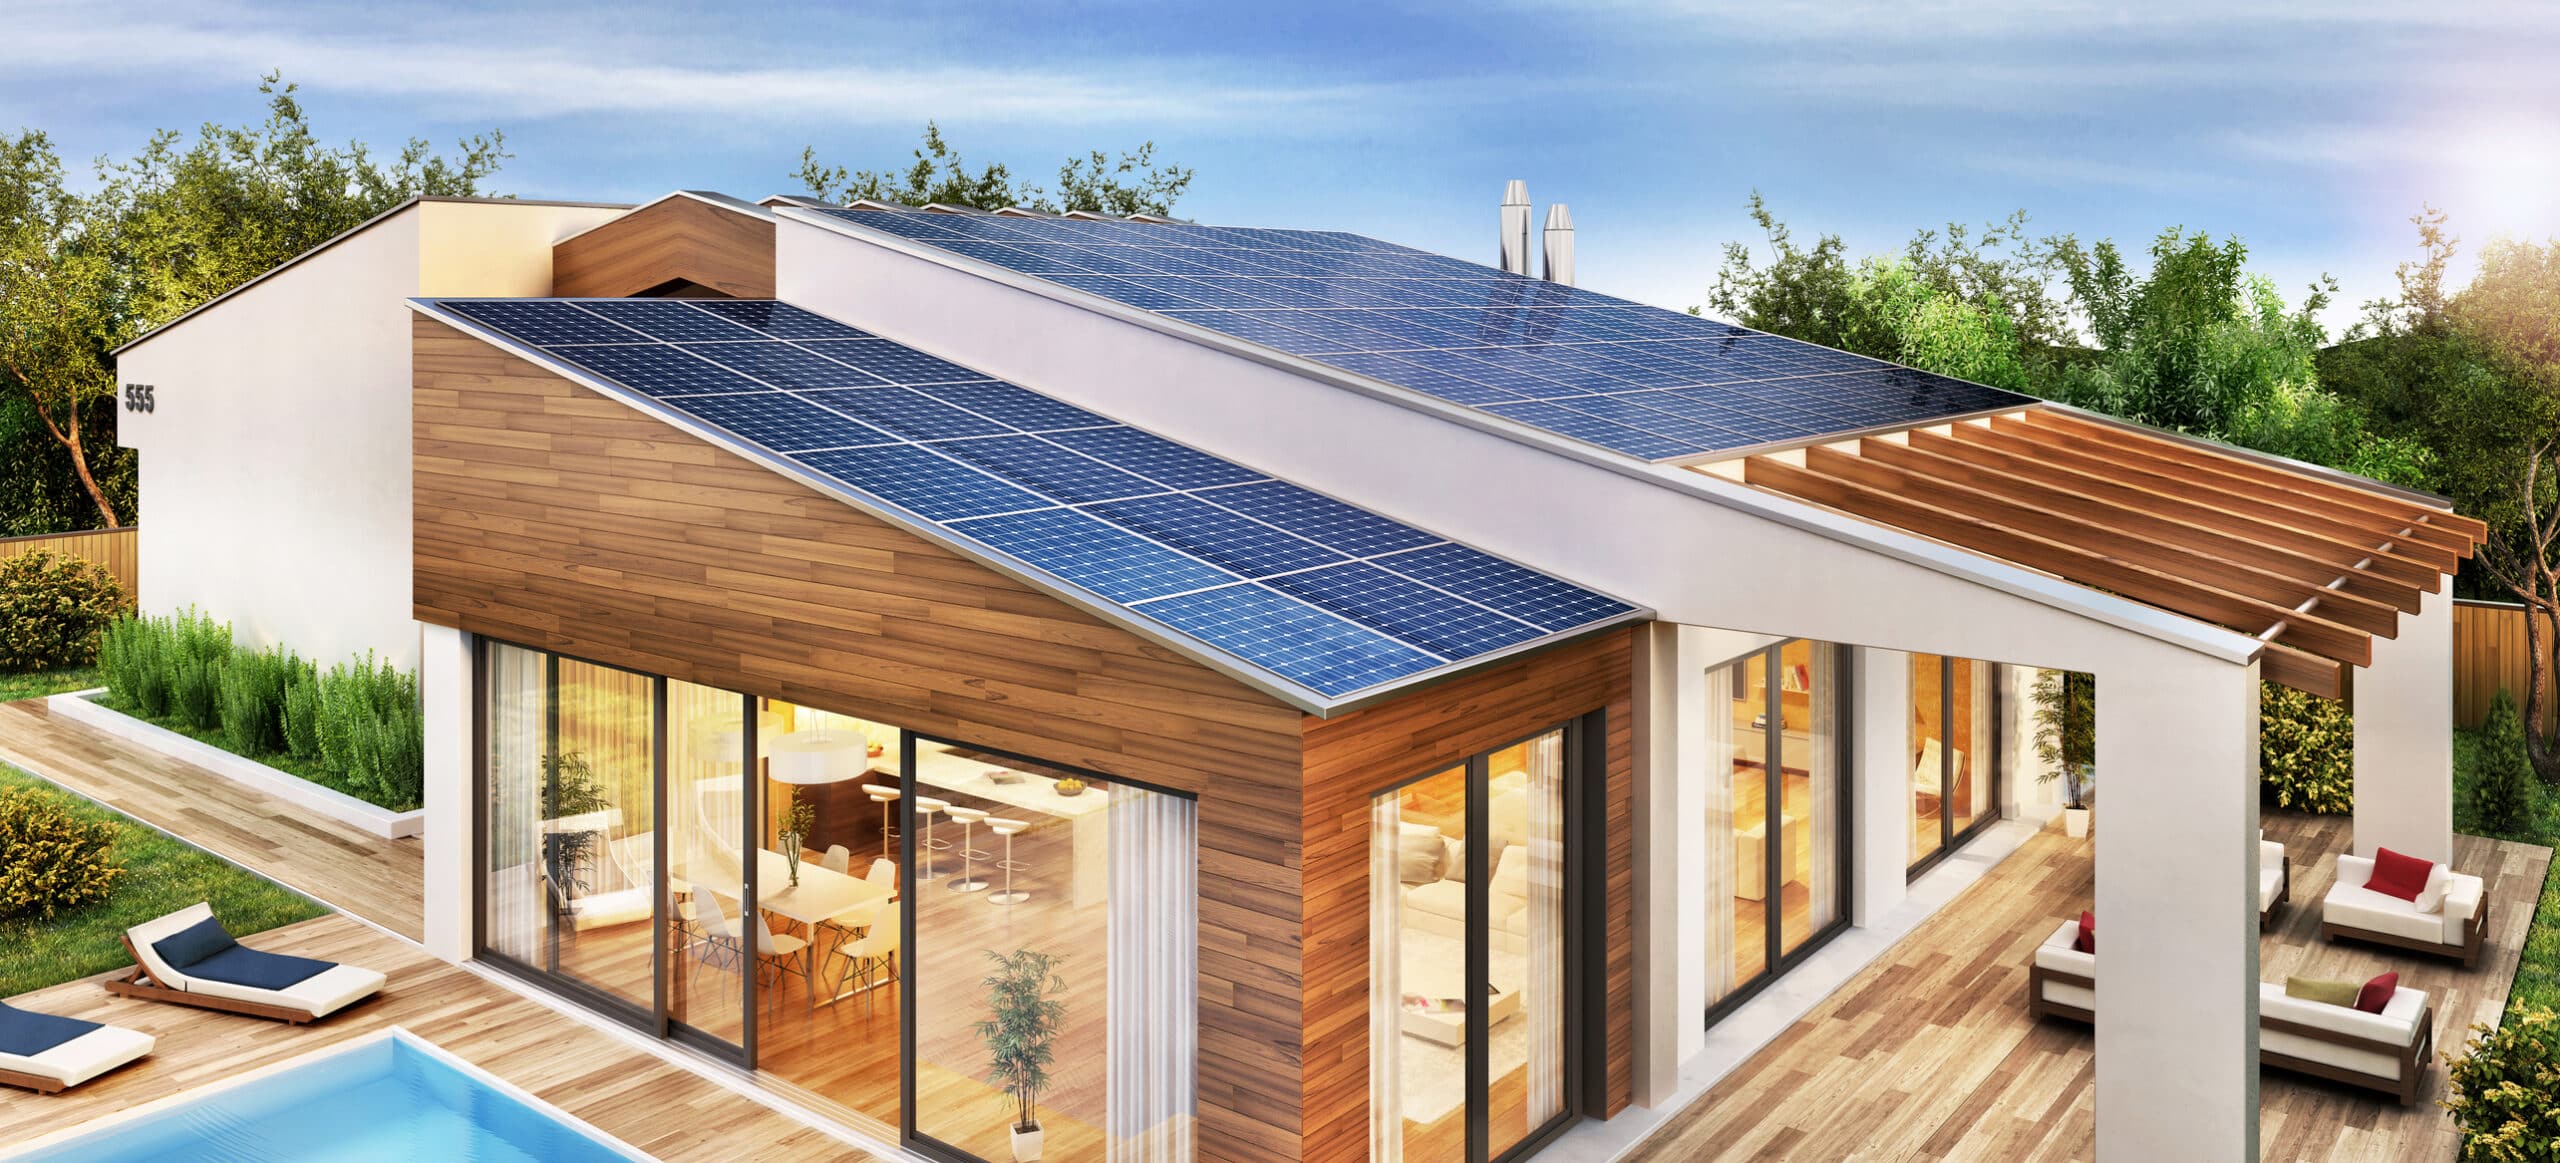 solar panels on a modern home with a swimming pool